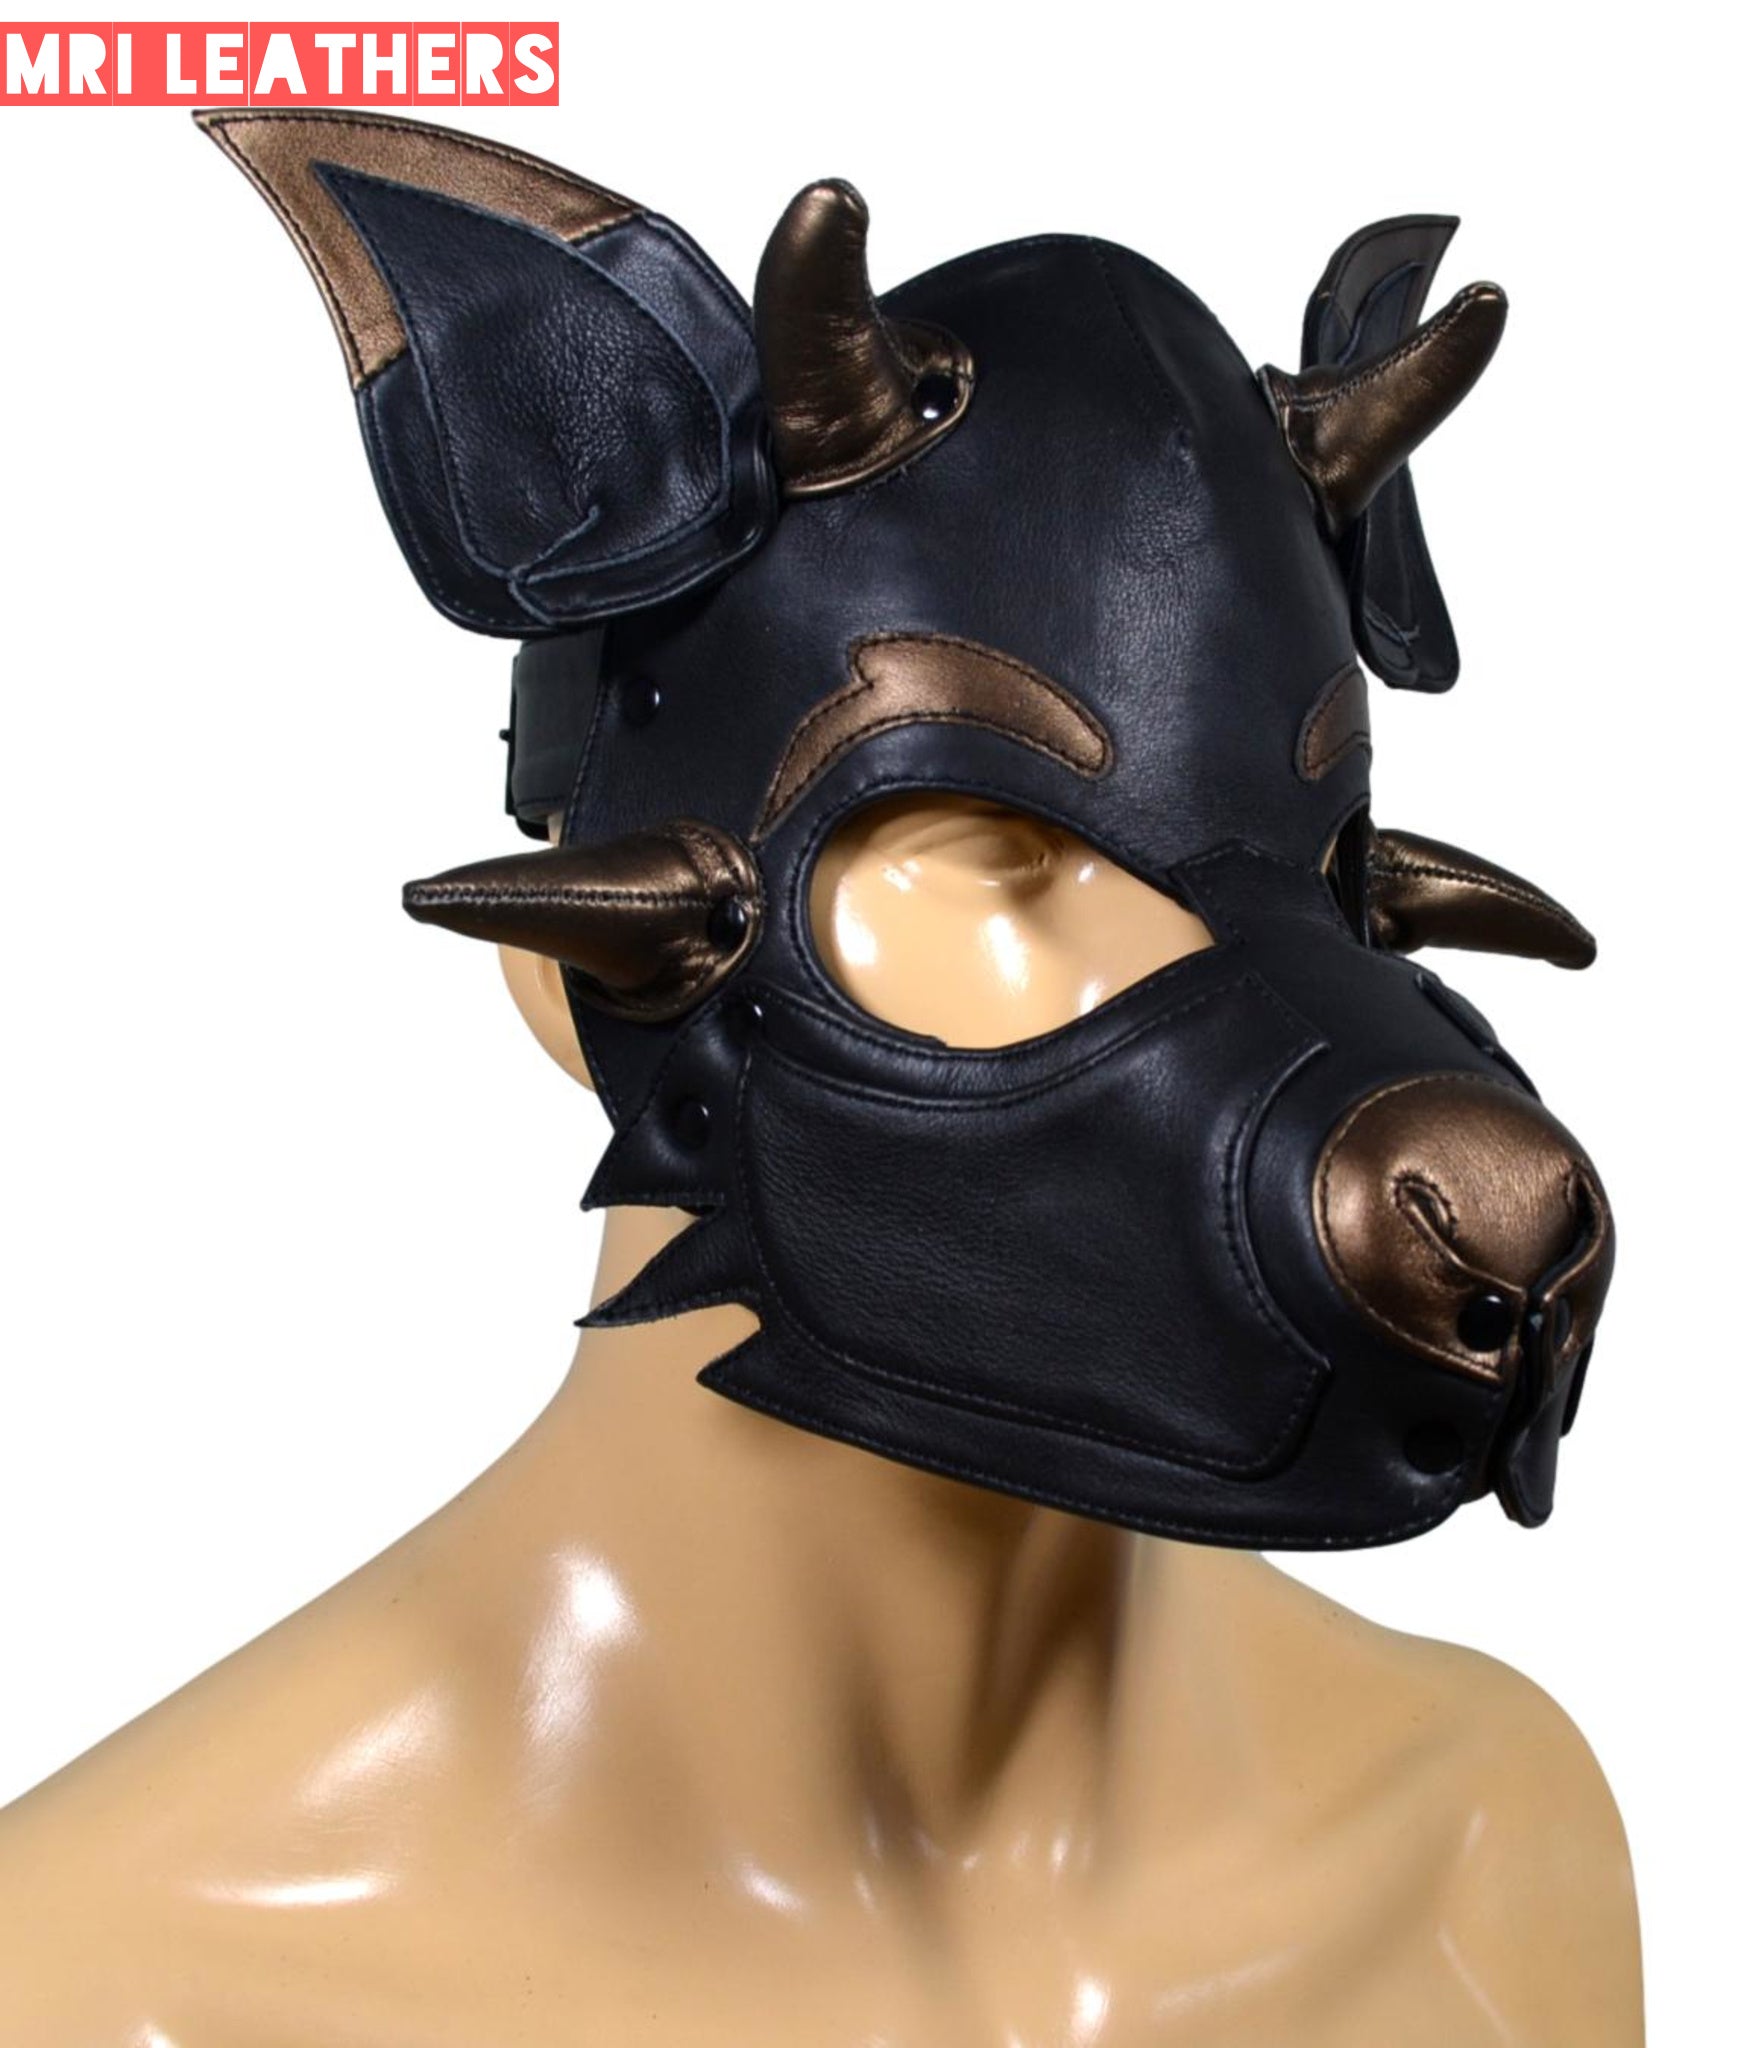 Leather Dog Mask Leather Pup Mask Dog Hood Pet Play Hood with horns - MRI Leathers